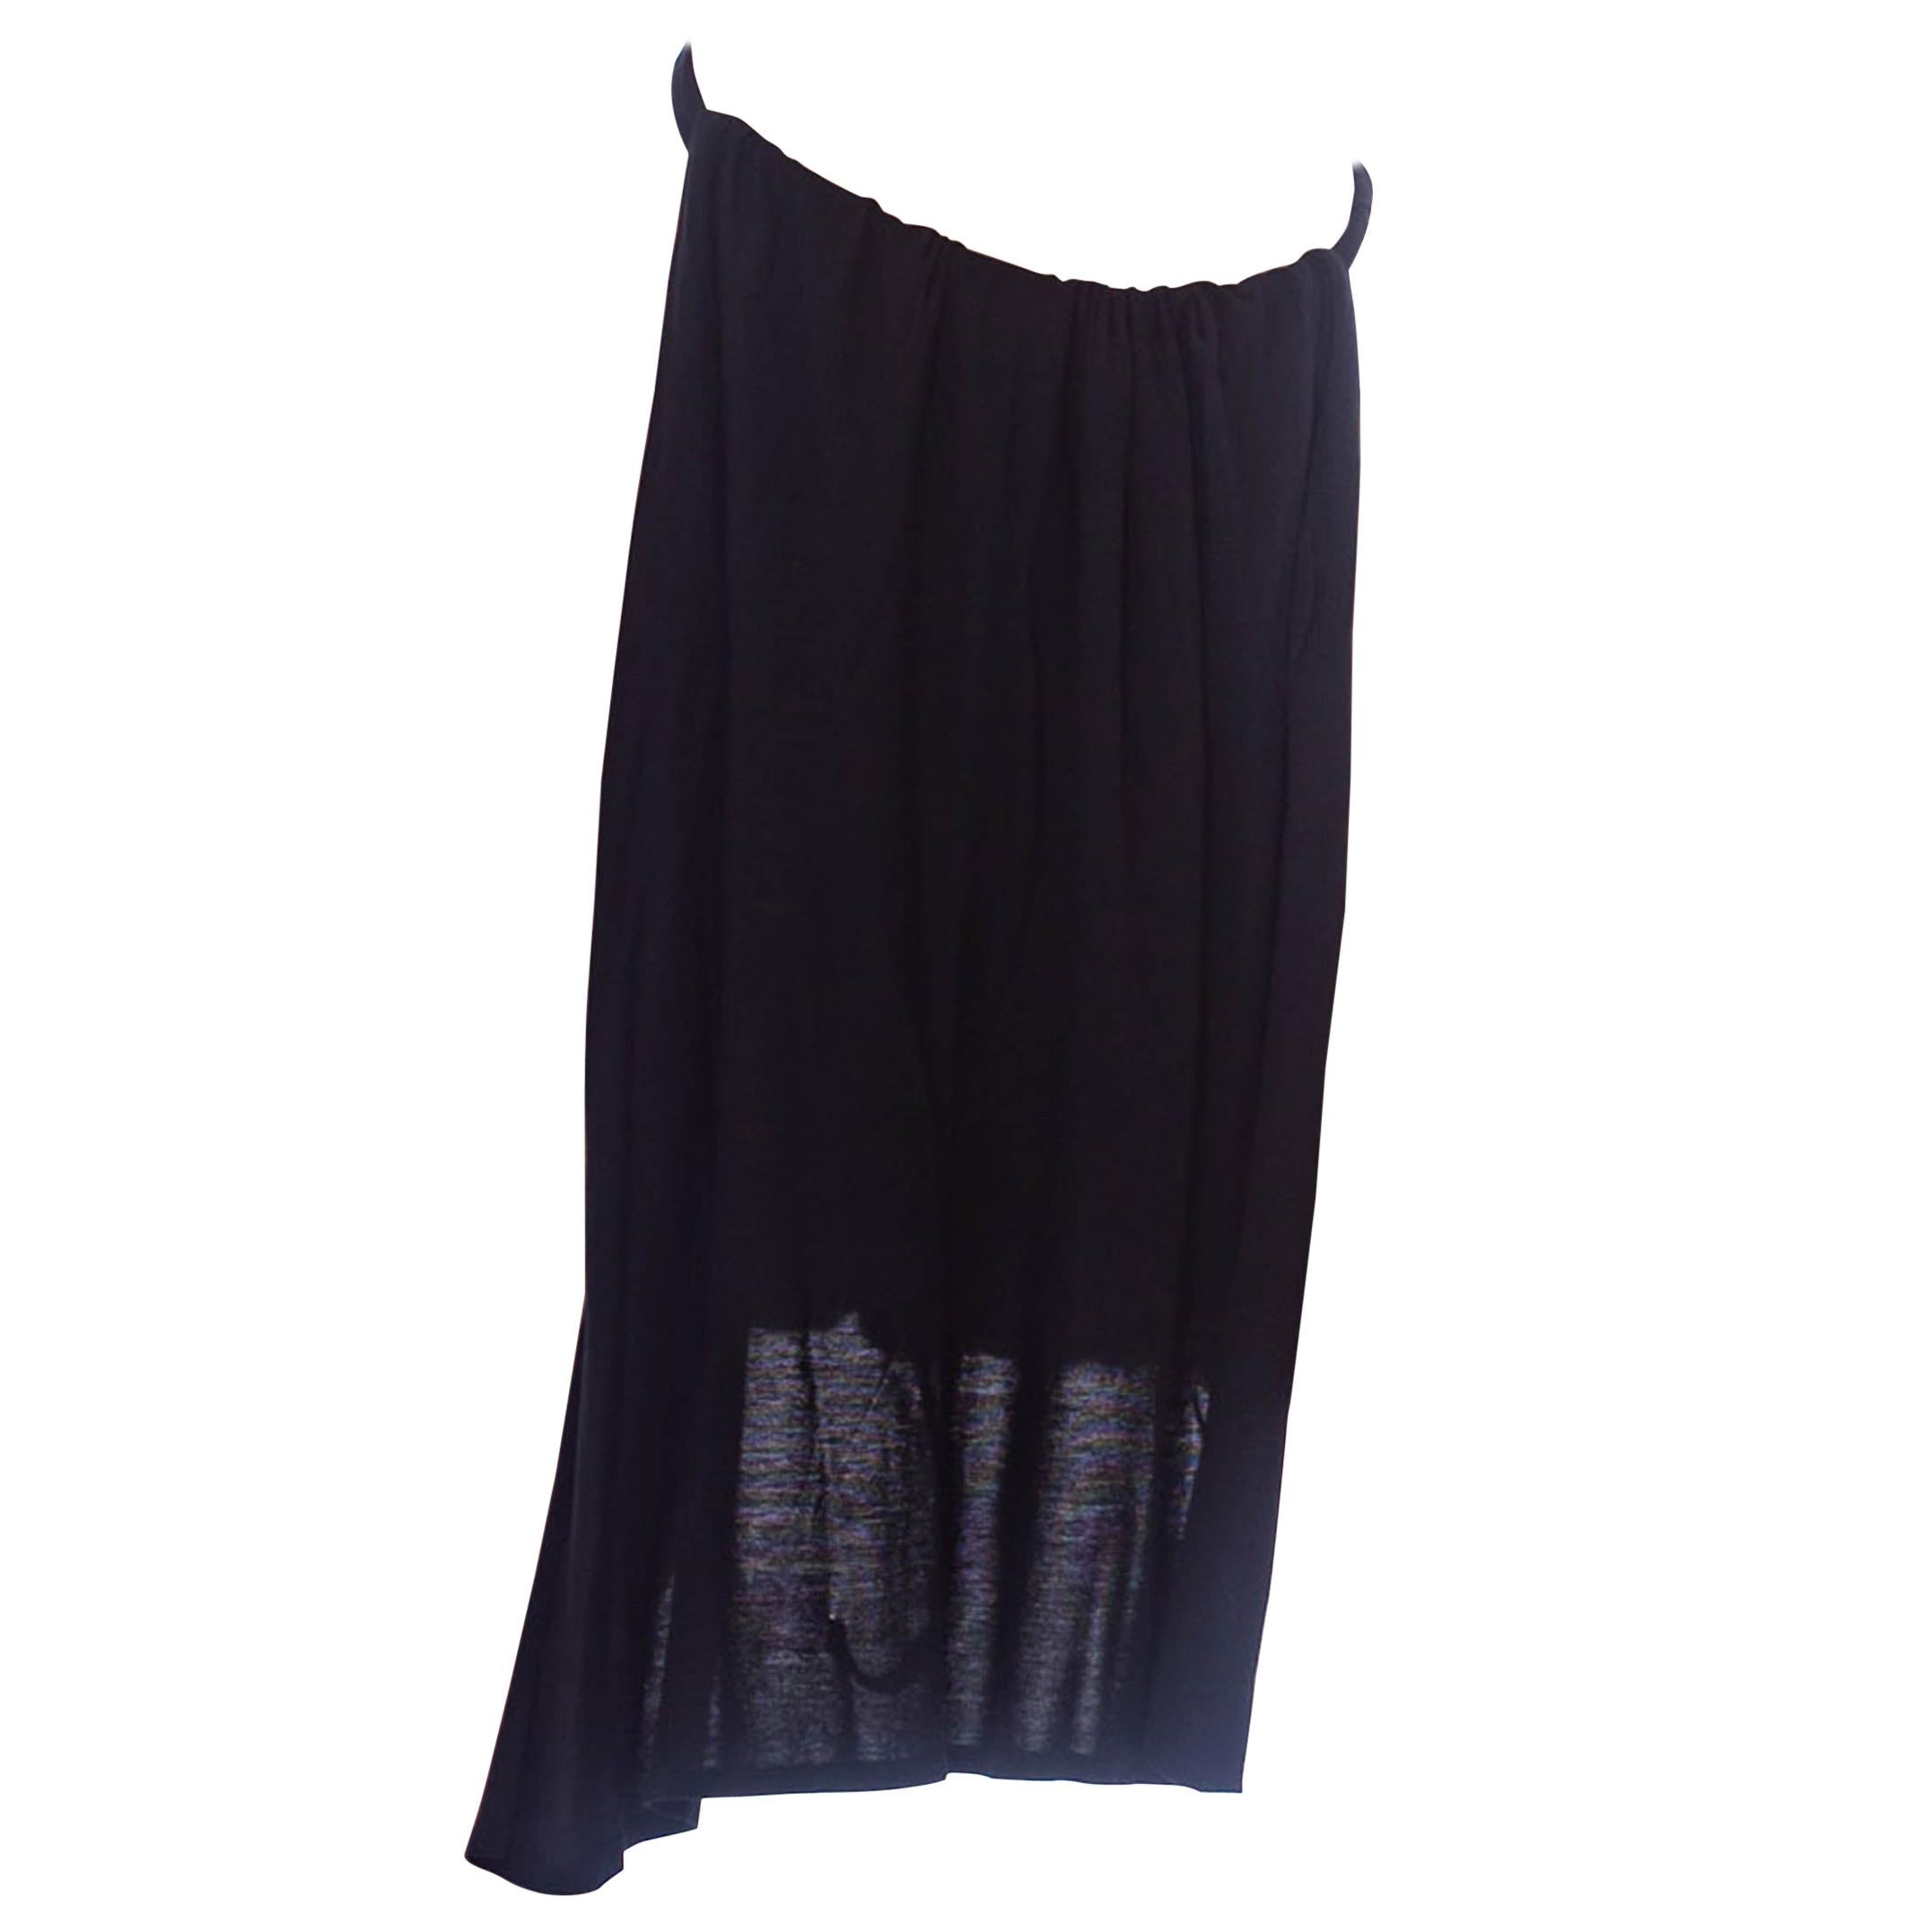 1990S JEAN PAUL GAULTIER Black Cotton Knit Sarong Skirt For Sale